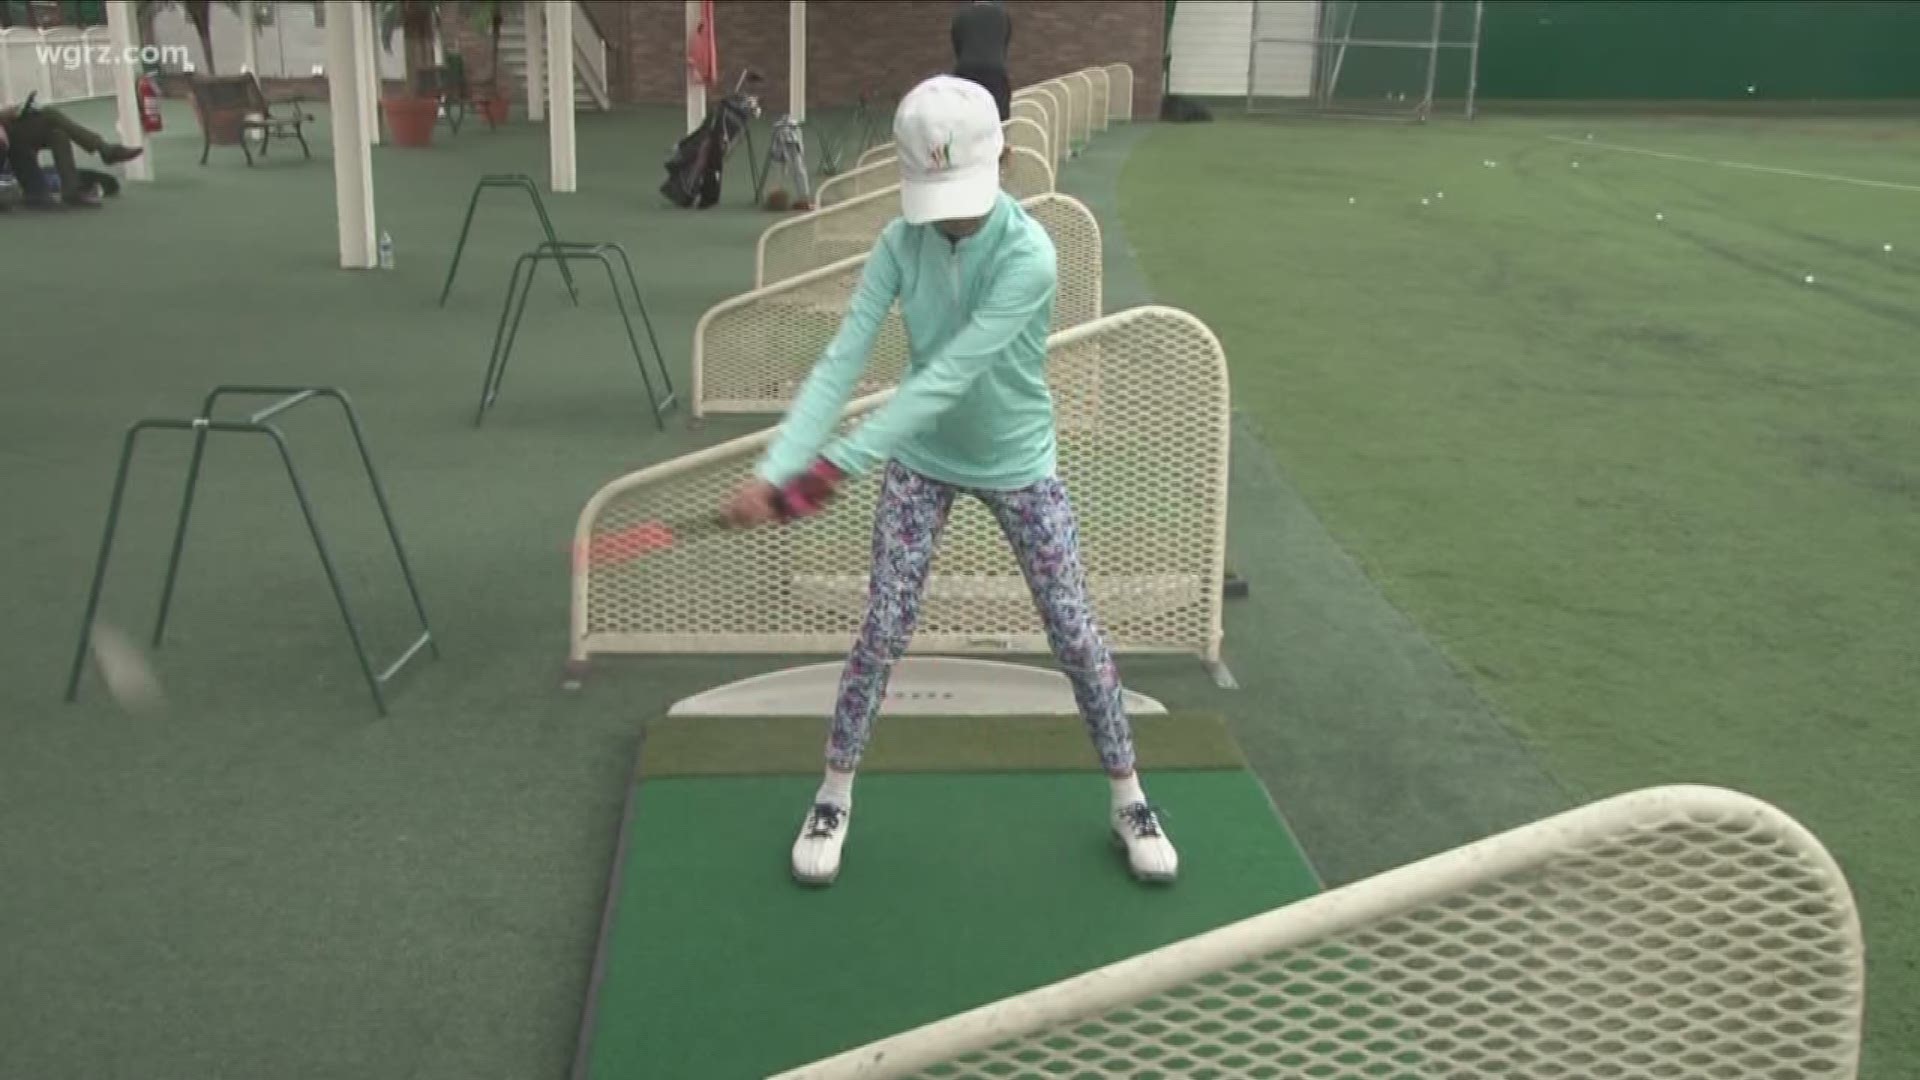 WNY's Great Kids: 9-year-old to Golf before The Masters at Augusta